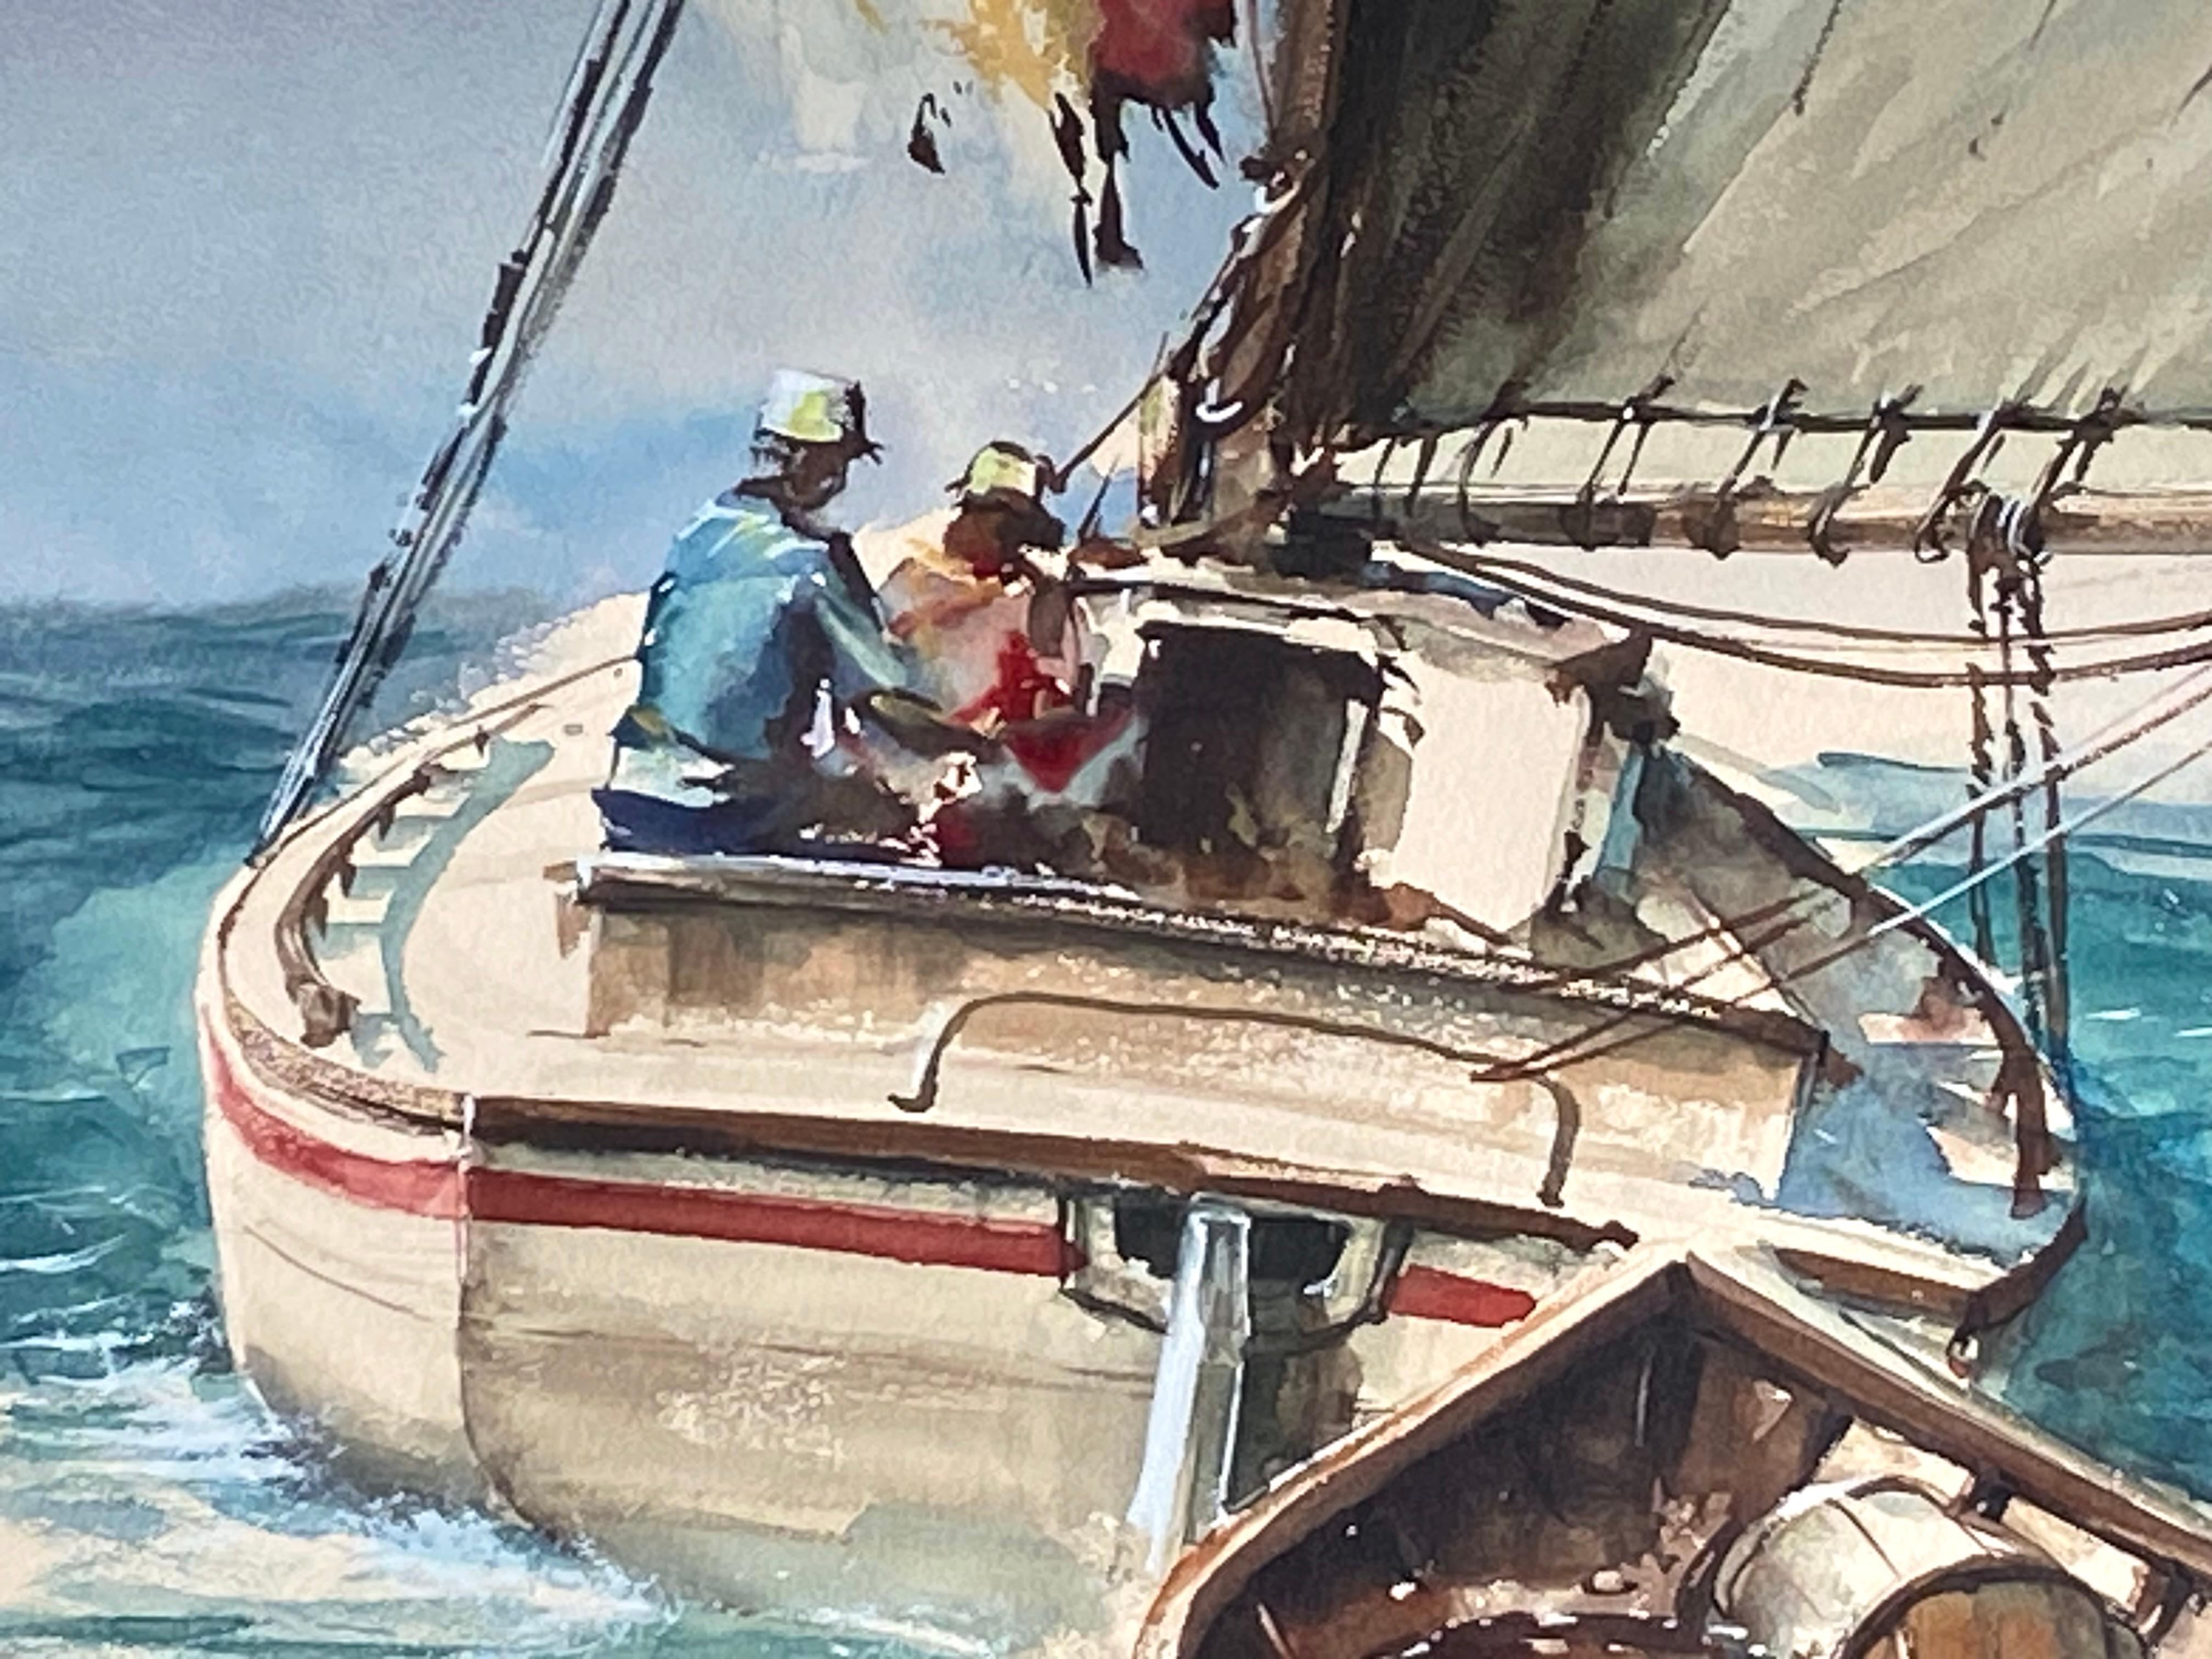 Original watercolor on archival paper of a sailboat with a trailing dory heading out to sea.  Attributed to the hand of Alexander Yaron.  Signed lower right and dated 1980.  Condition is excellent.  Under glass. The artwork is matted and housed in a